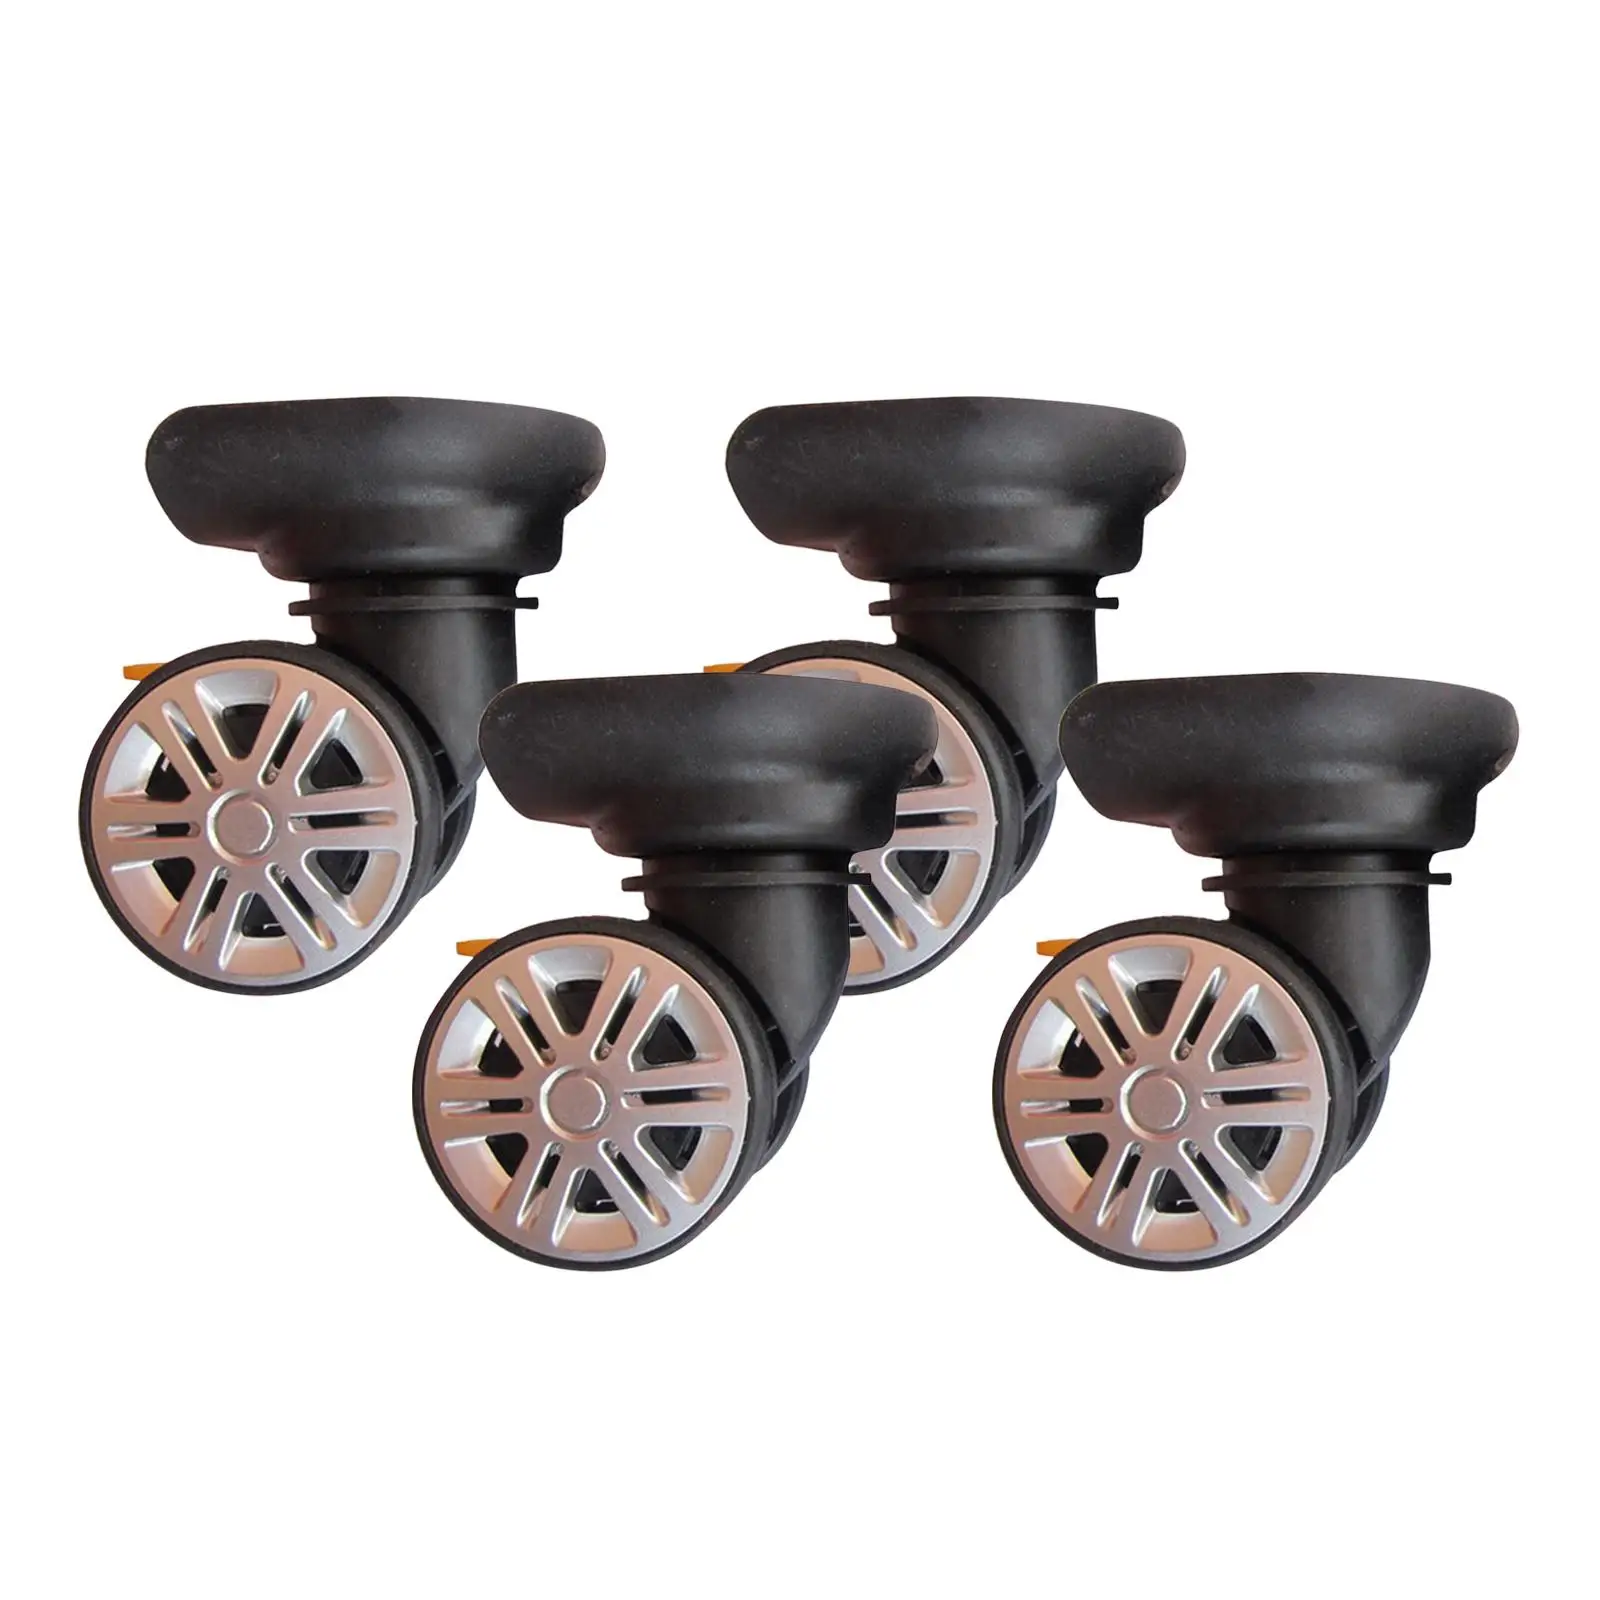 4Pcs Suitcase Wheels Lightweight Suitcase Swivel Wheels for Trolley Case Shopping Carts Luggage Suitcases Travelling Case